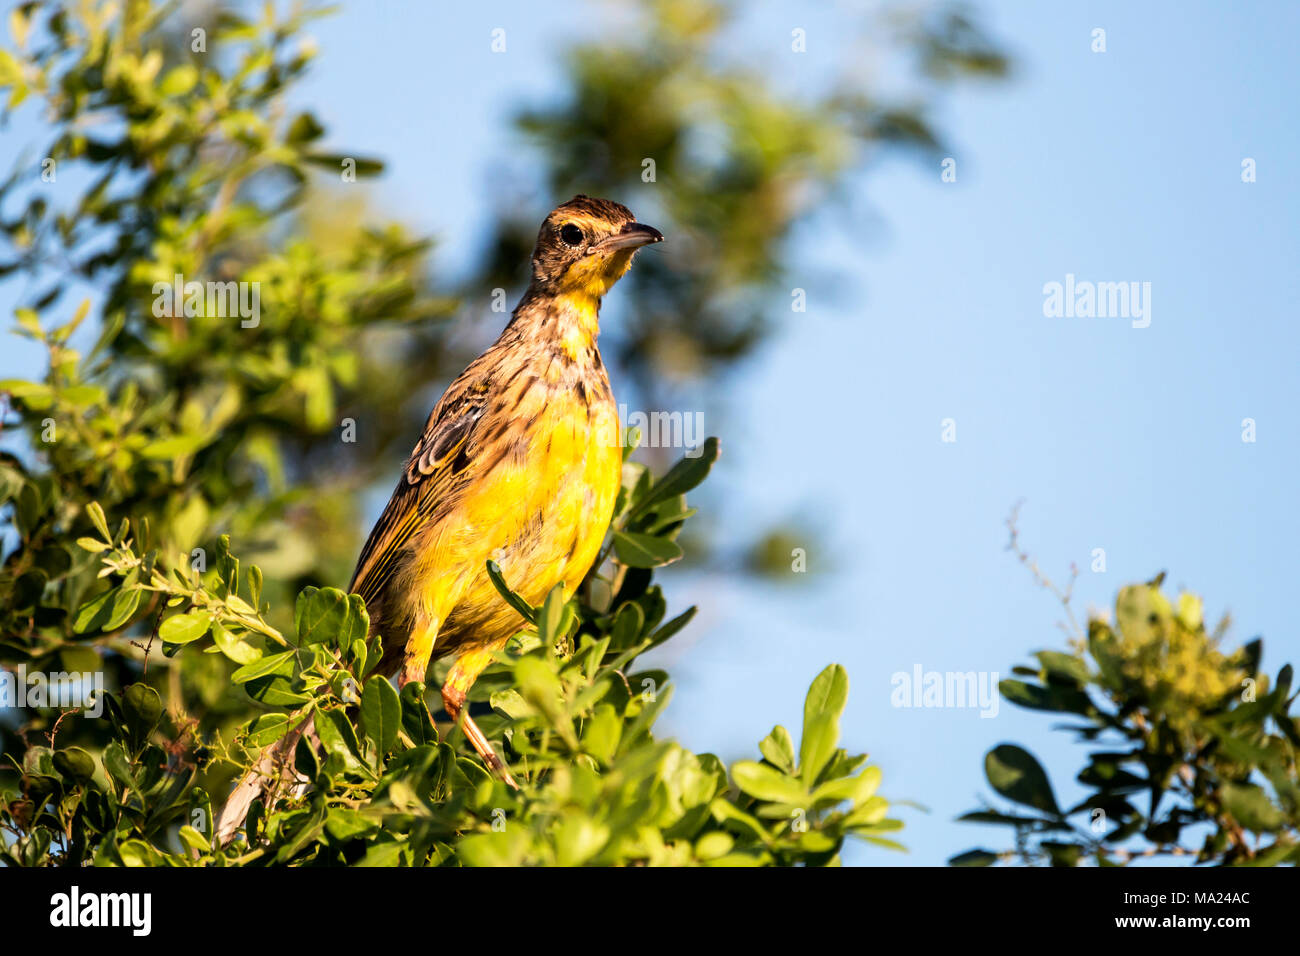 Alert Yellow Throated Longclaw bird perched on treetop green leaves against blue sky at St Lucia in South Africa Stock Photo